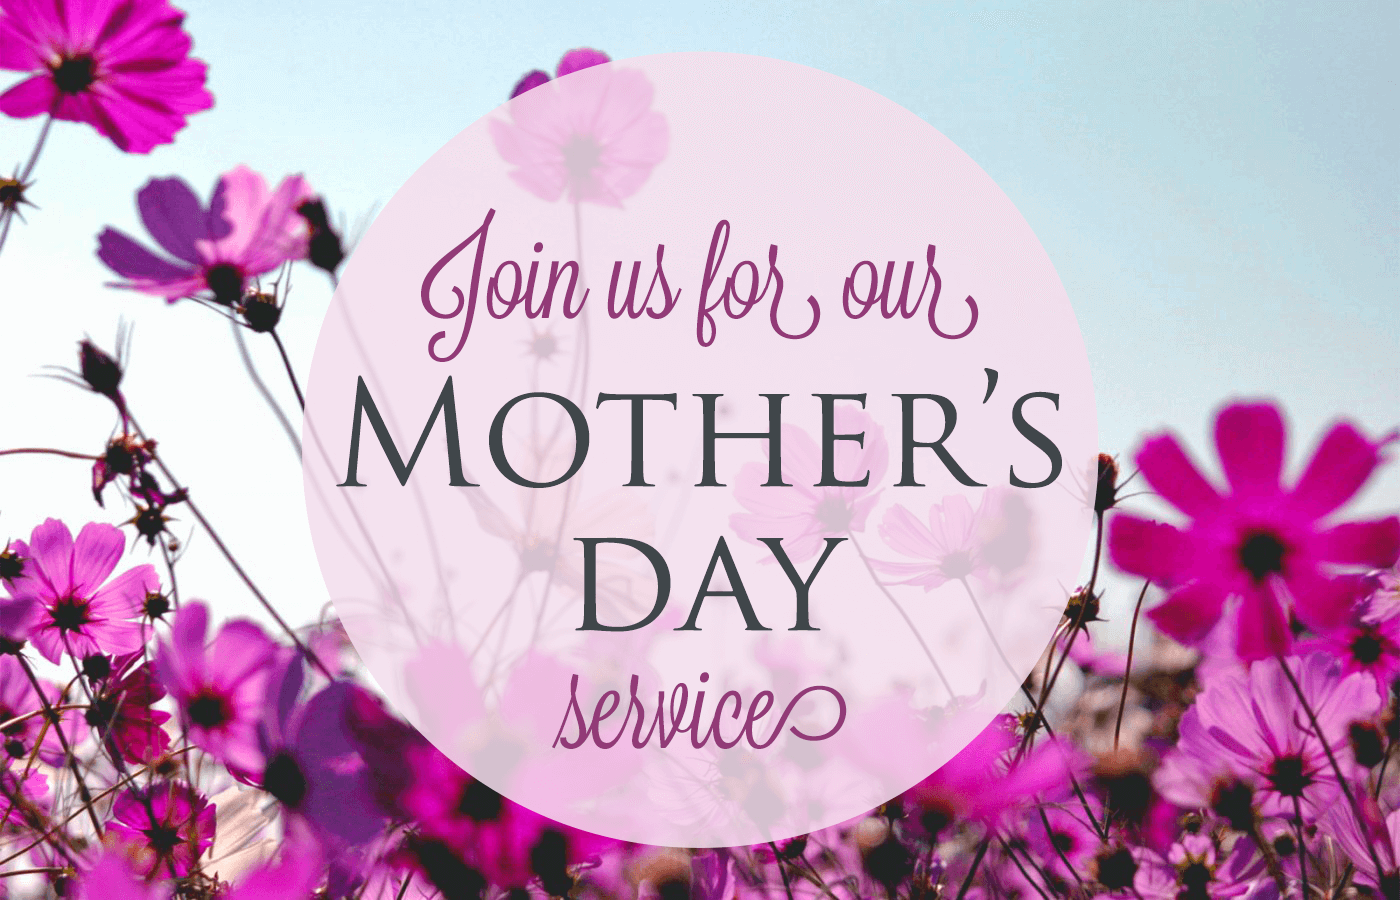 Join us for our Mother's Day service